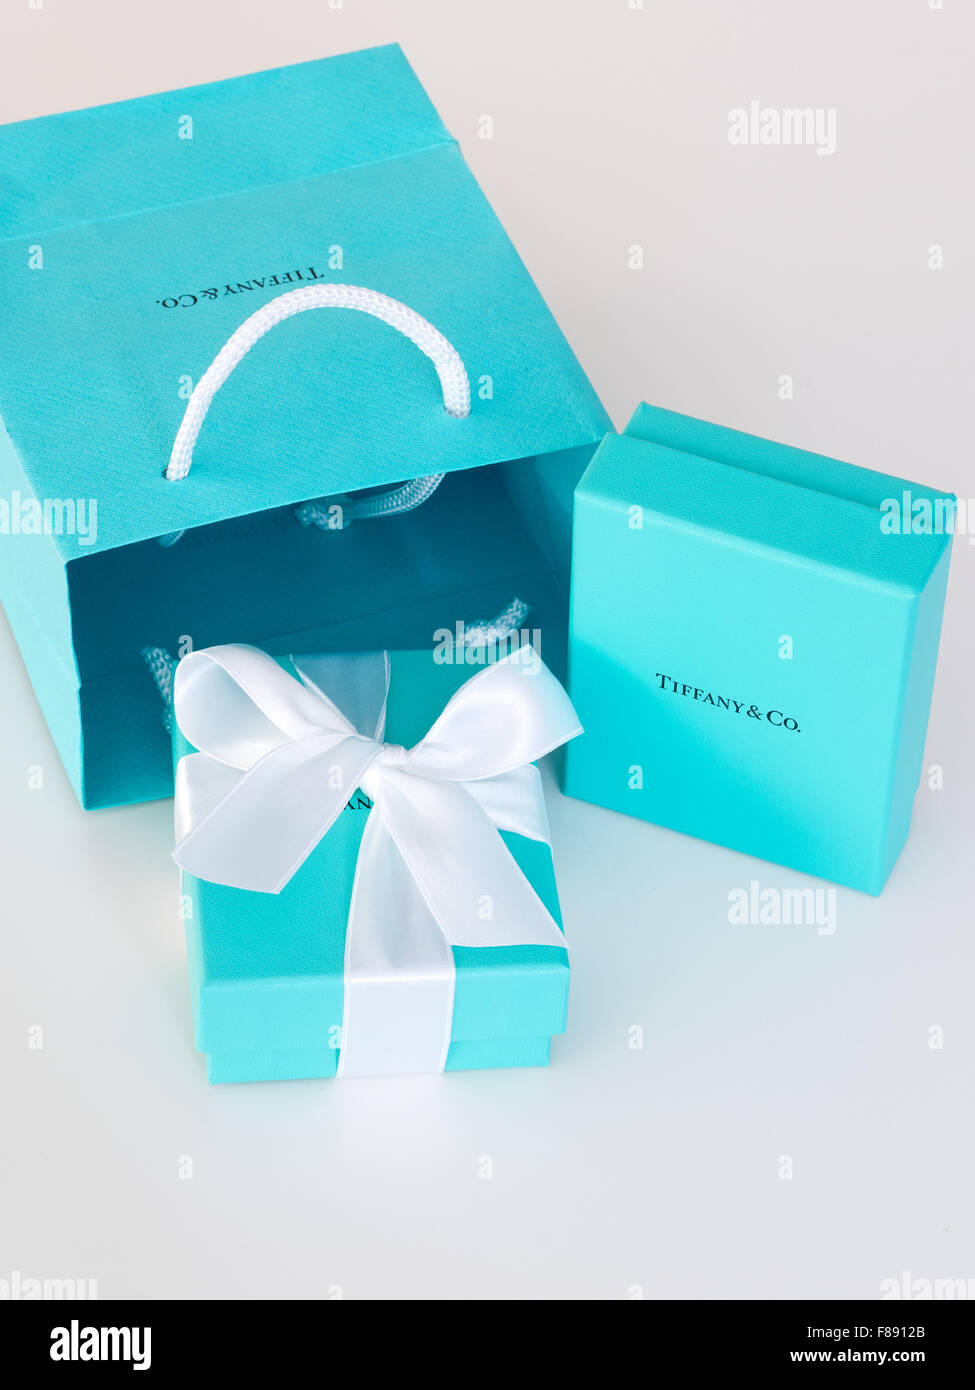 A Tiffany Blue Box Little Blue Box From Tiffany From Tiffany And Co The Famous New York City